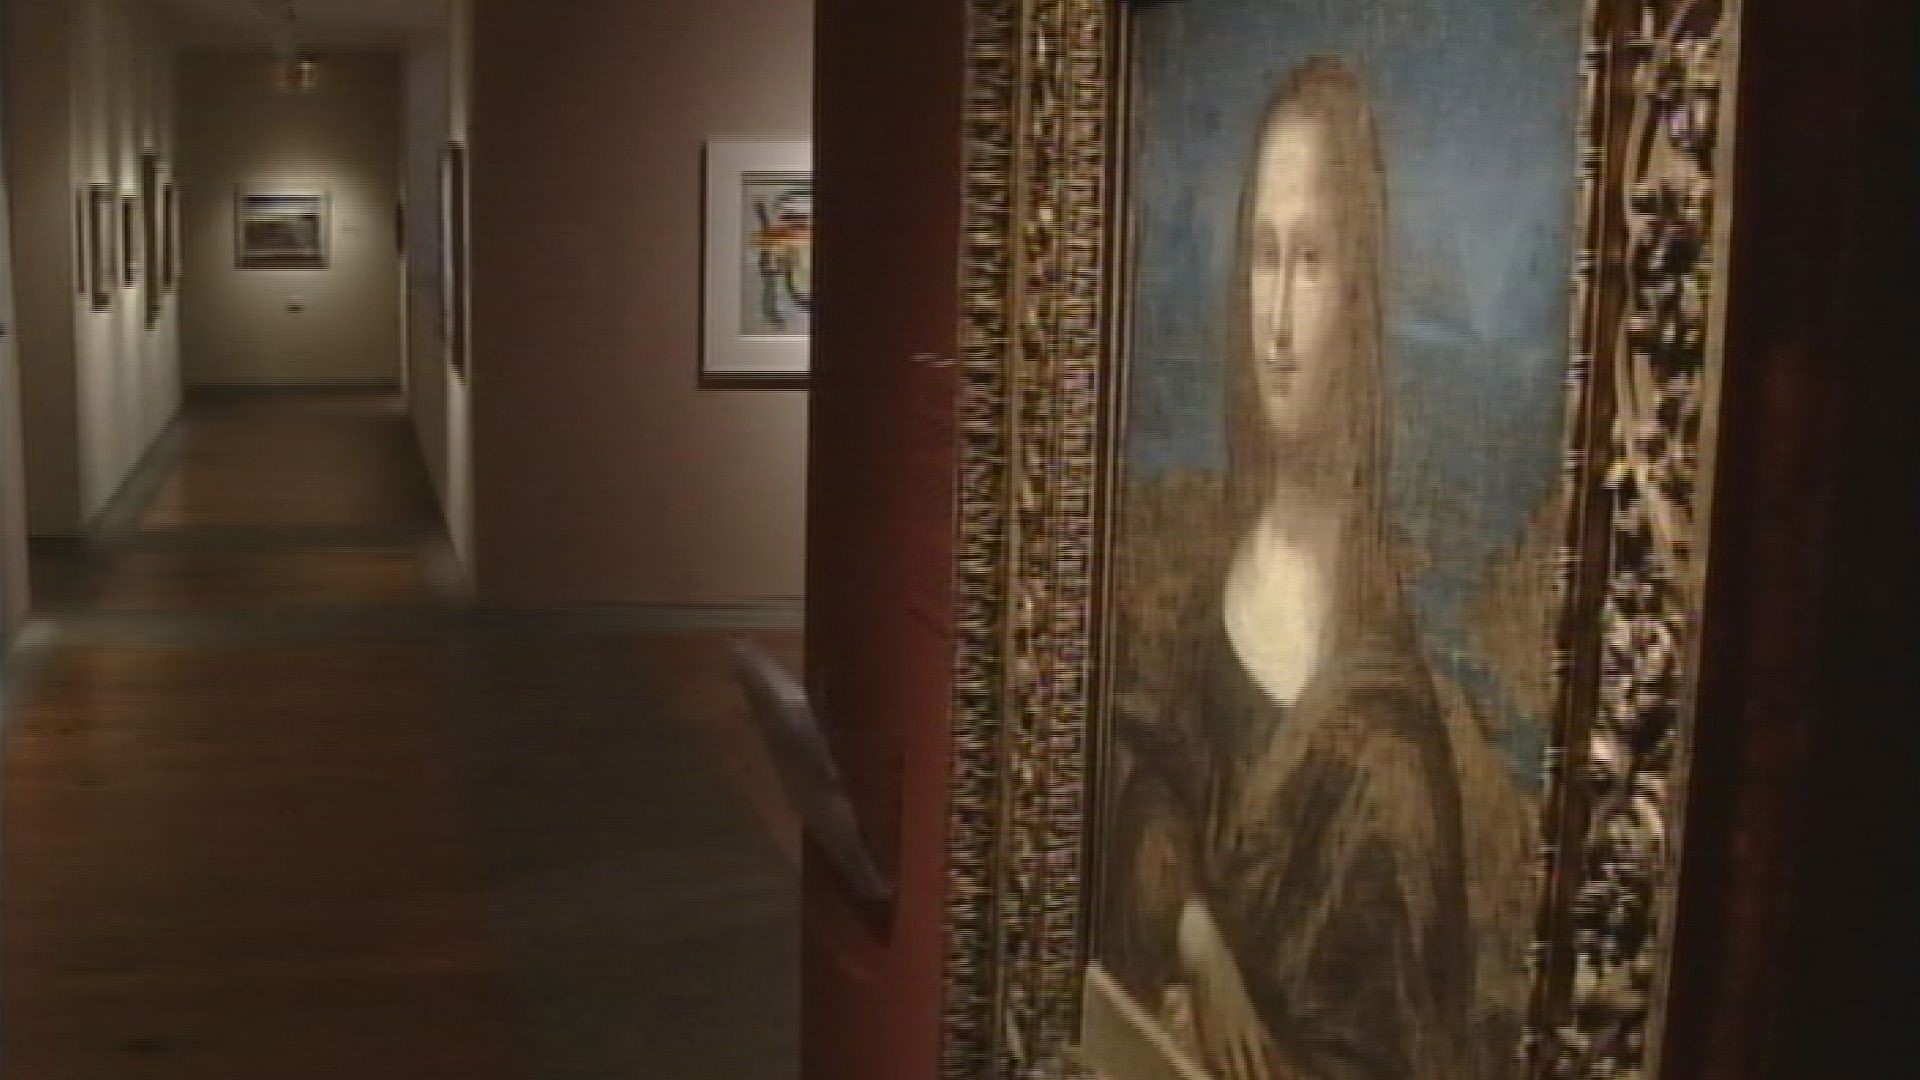 At the height of Da Vinci Code fever in May 2006, Jennifer Rooks visited the Portland Museum of Art to examine its Mona Lisa look-alike.